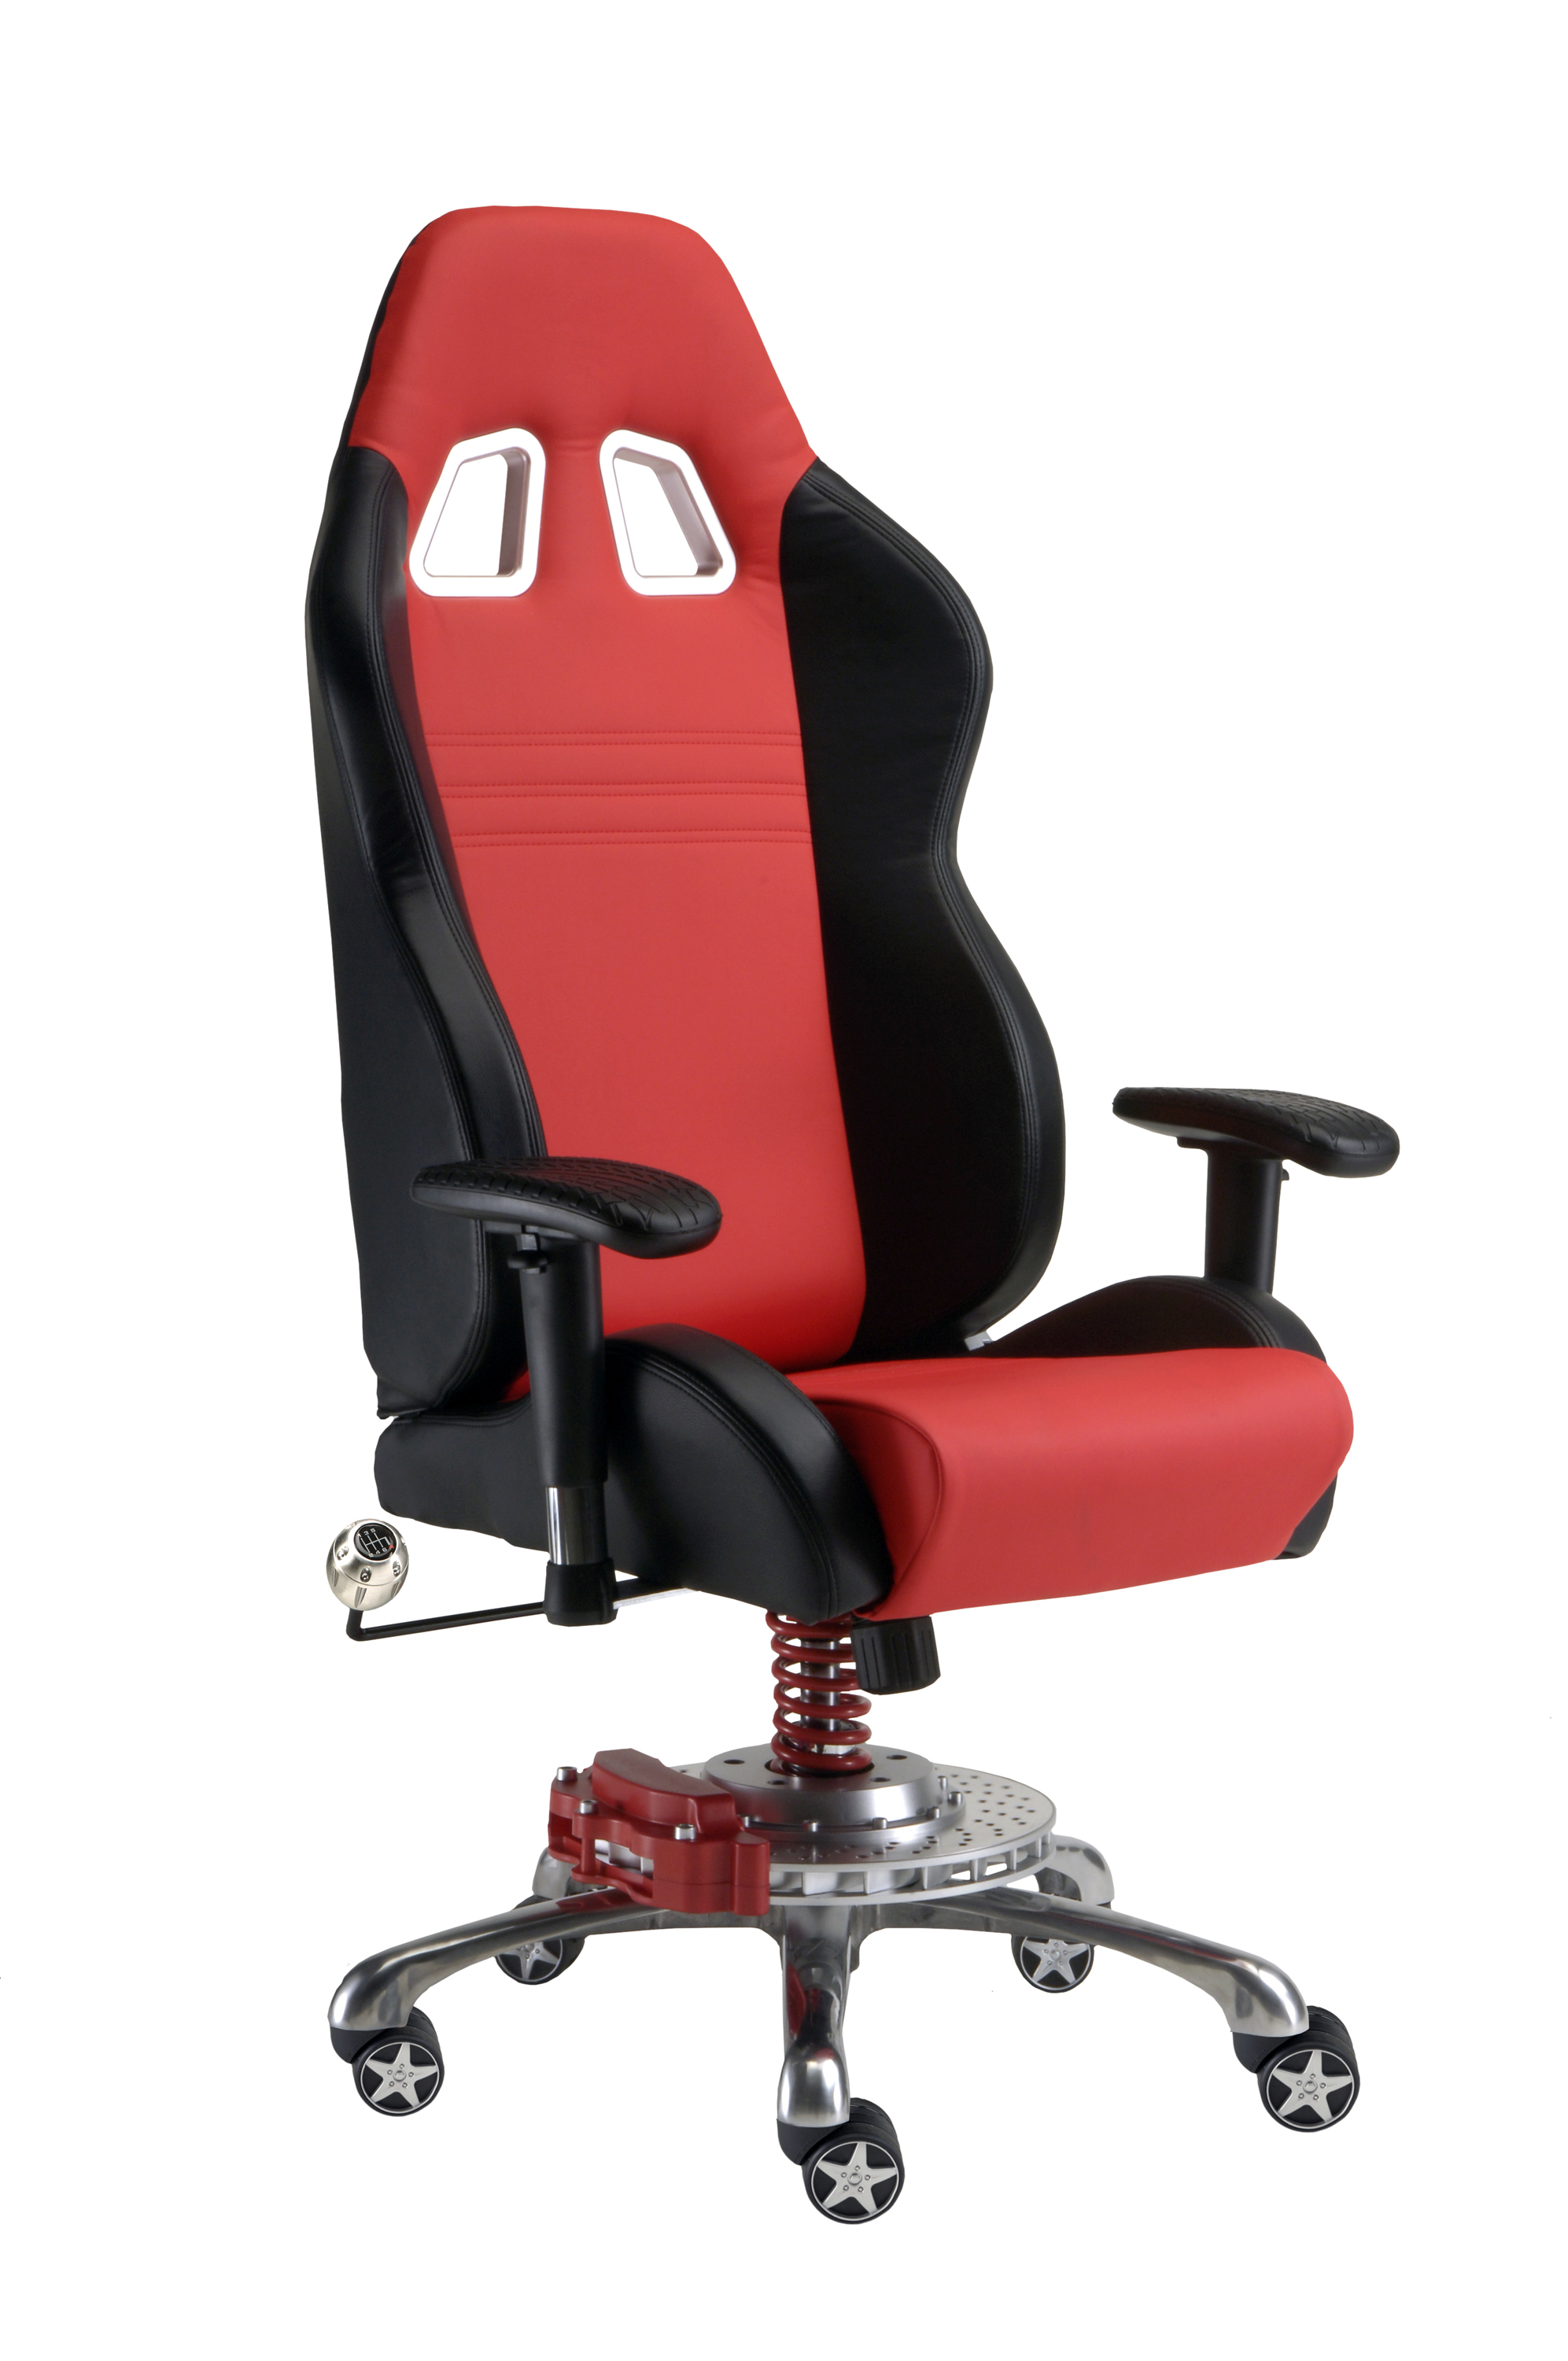 Intro-Tech Automotive, Pitstop Furniture, GP1000R Office Chair Red, Desk Chair